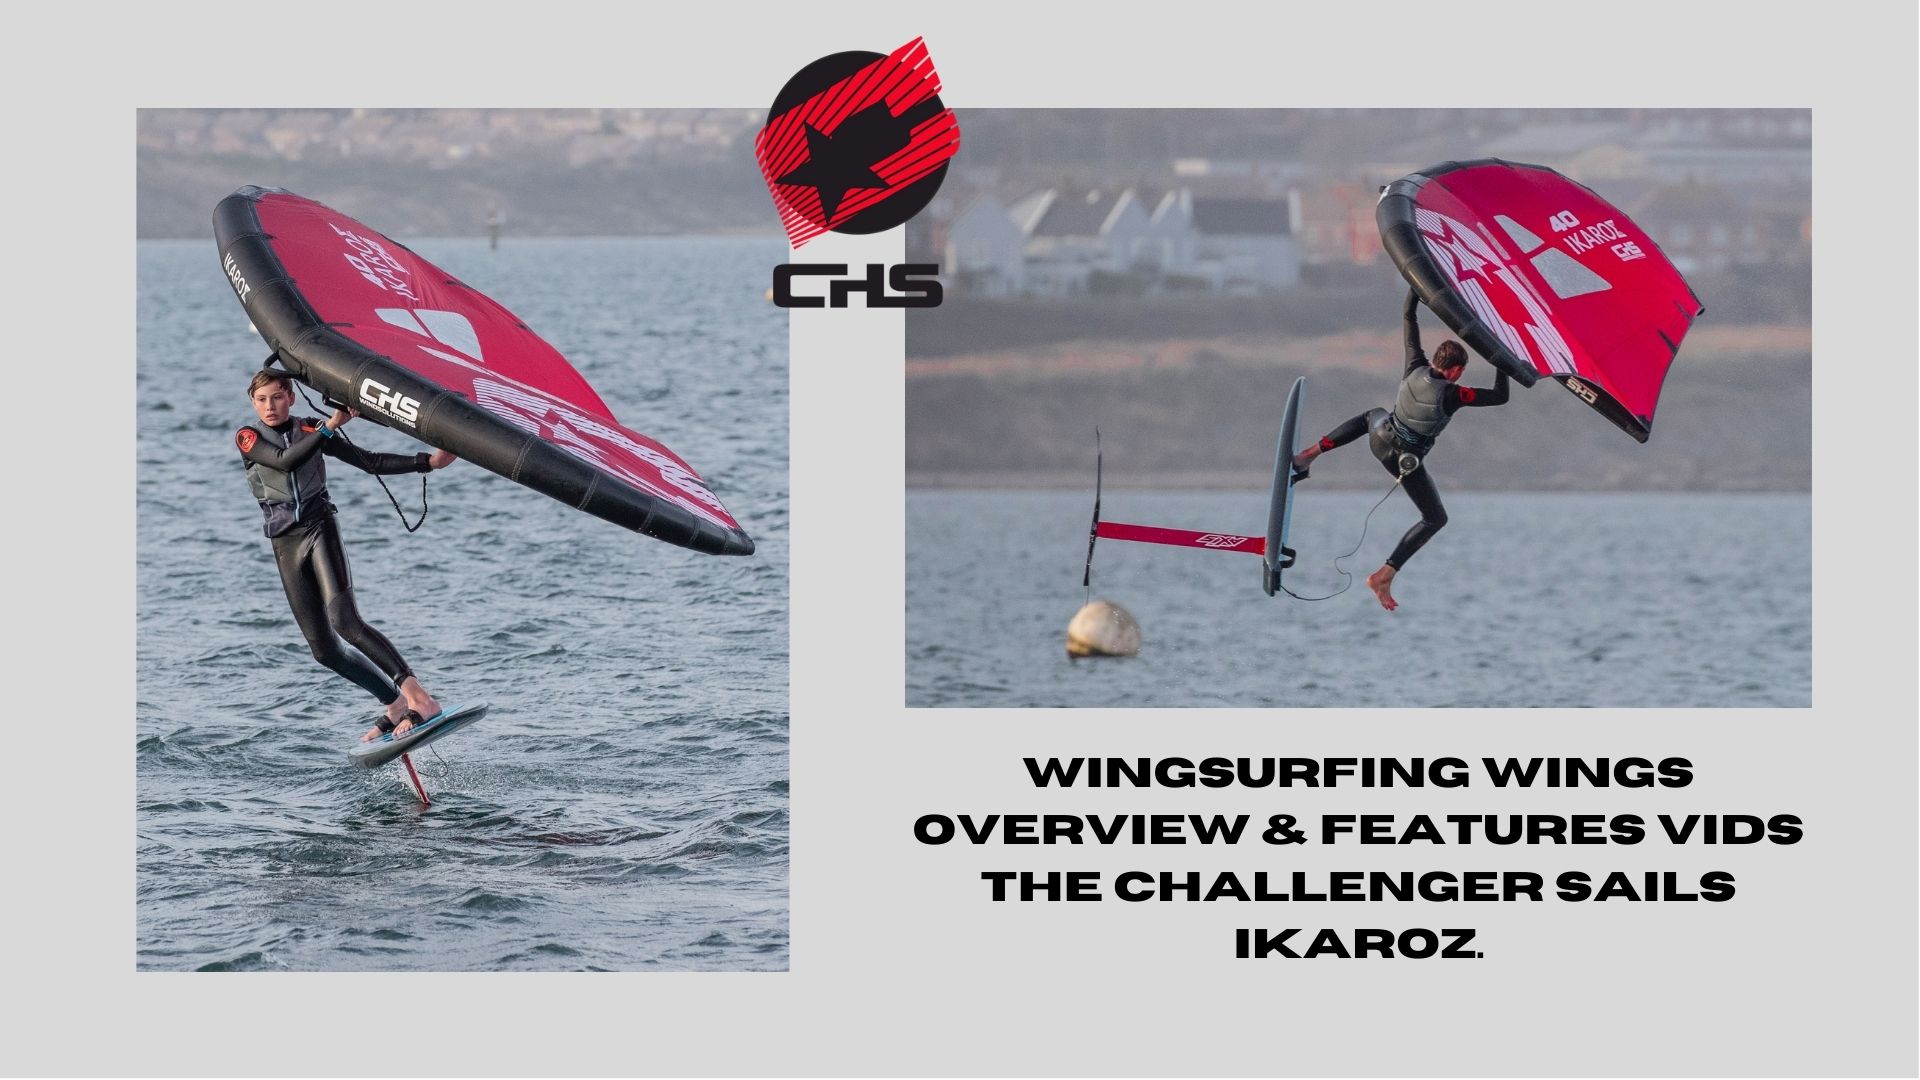 Wingsurfing wings overview & features vids the Challenger Sails Ikaroz.